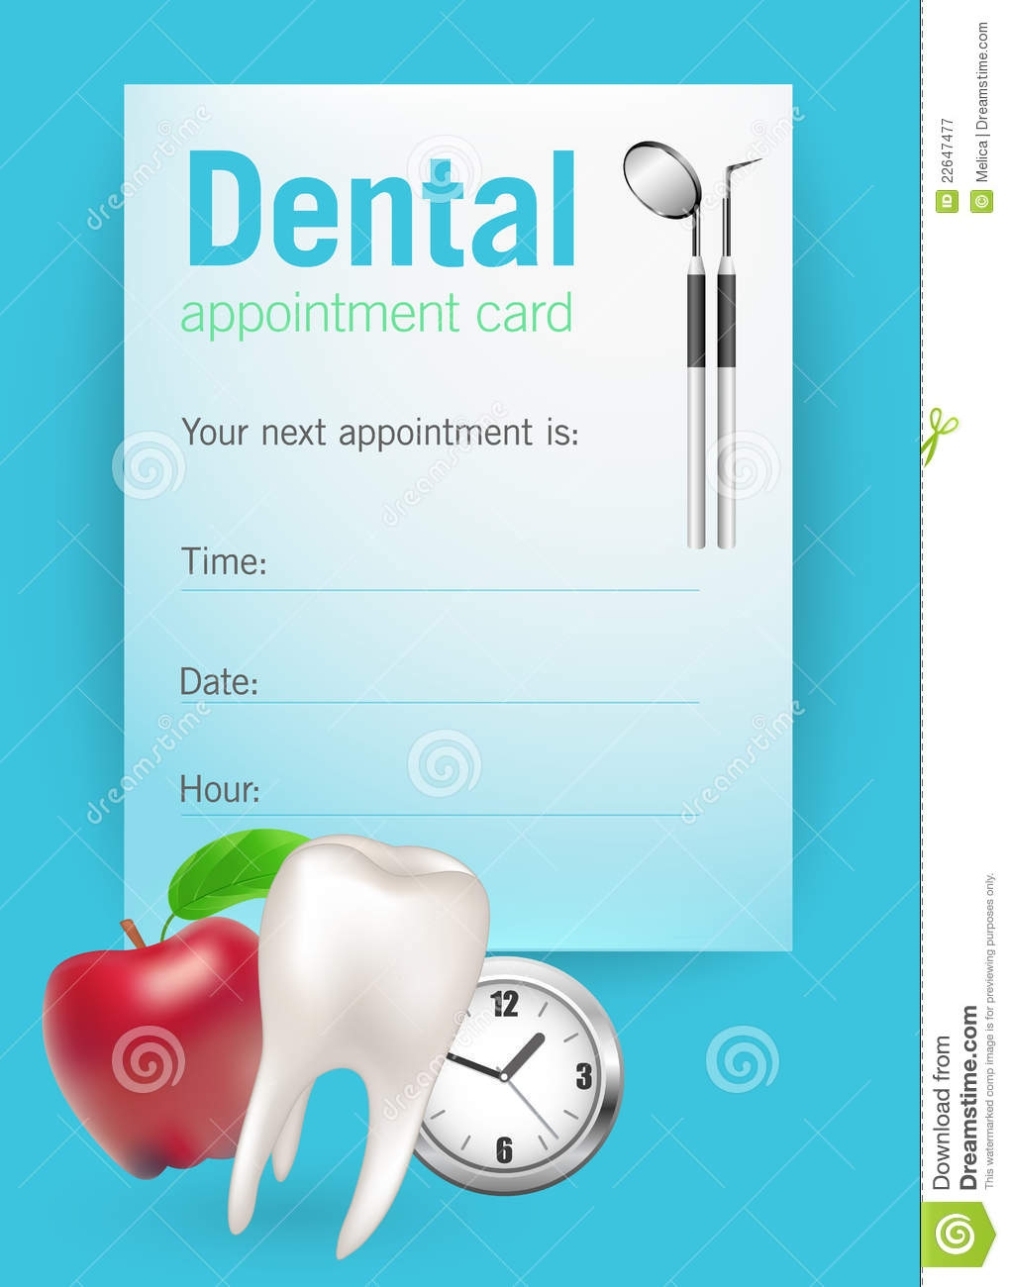 Dental Appointment Card Royalty Free Stock Photography – Image: 22647477 Pertaining To Dentist Appointment Card Template